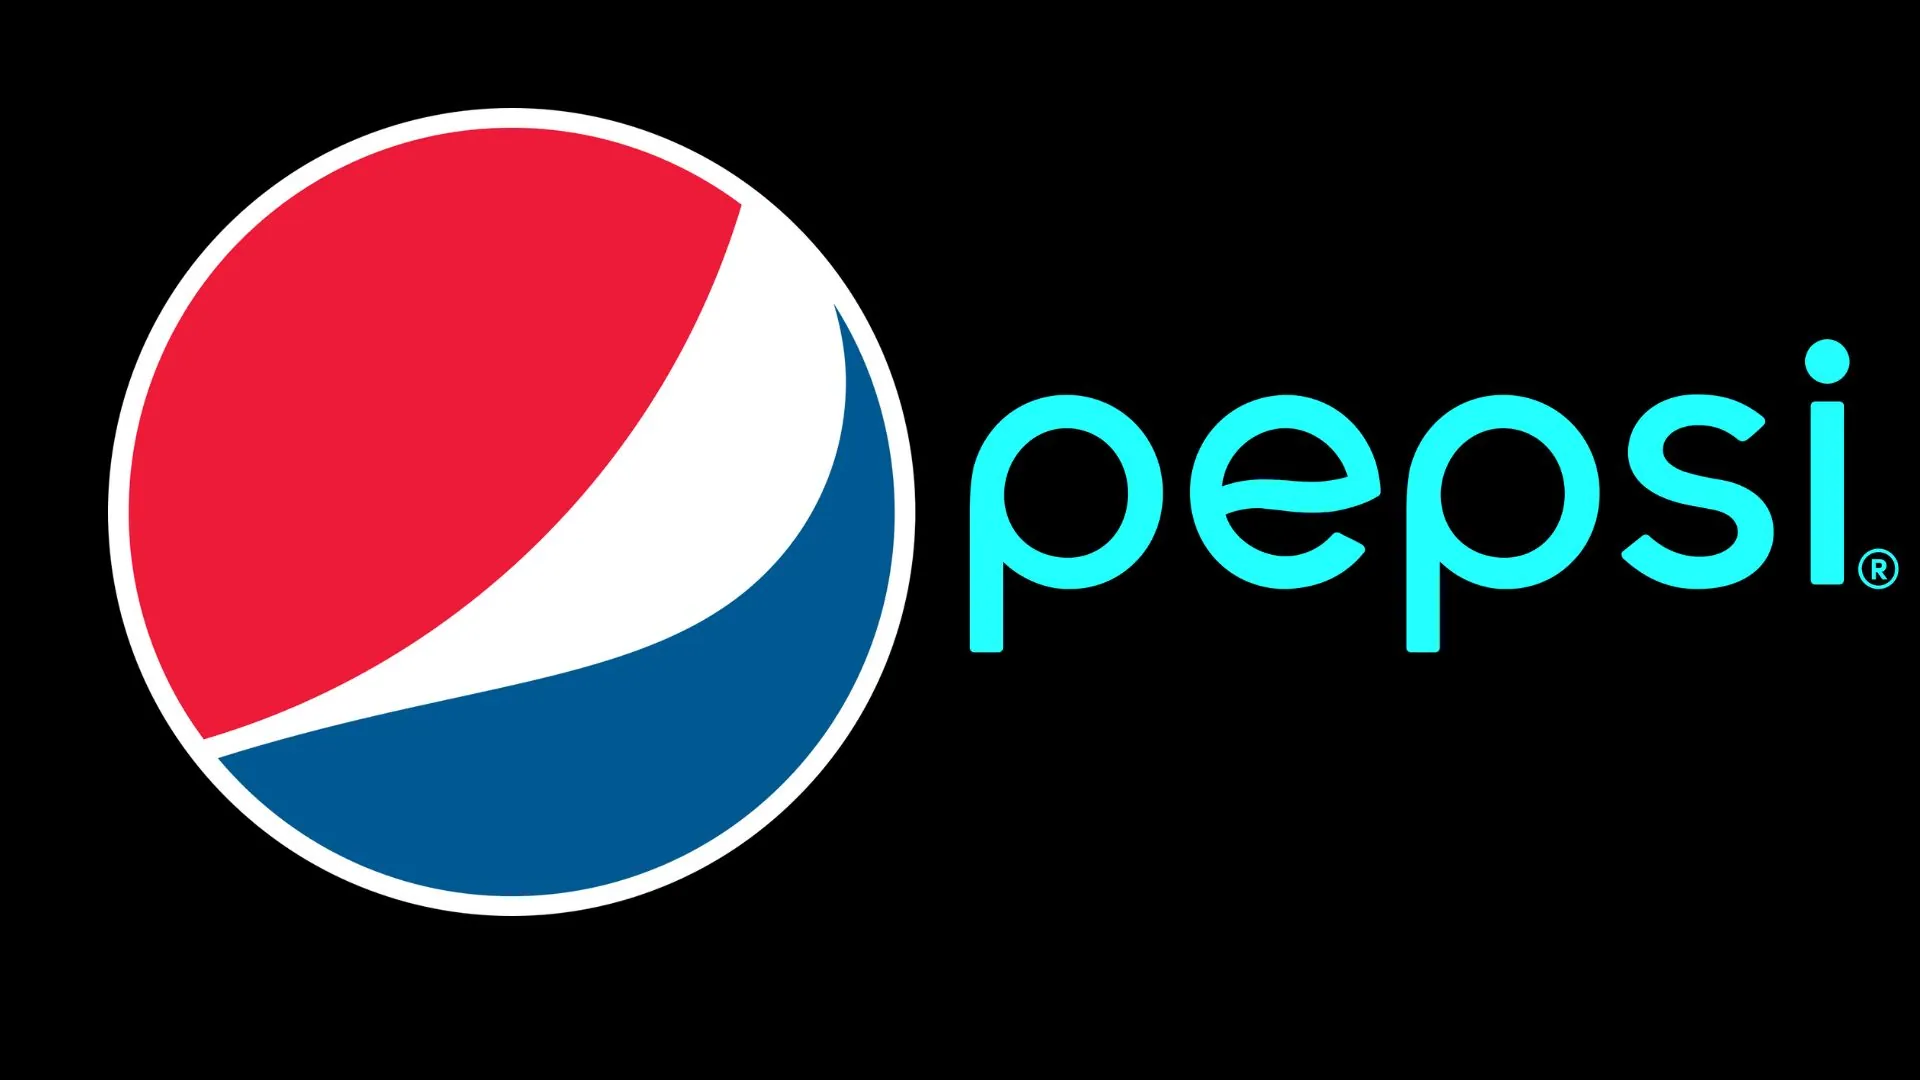 Who is the Owner of Pepsi